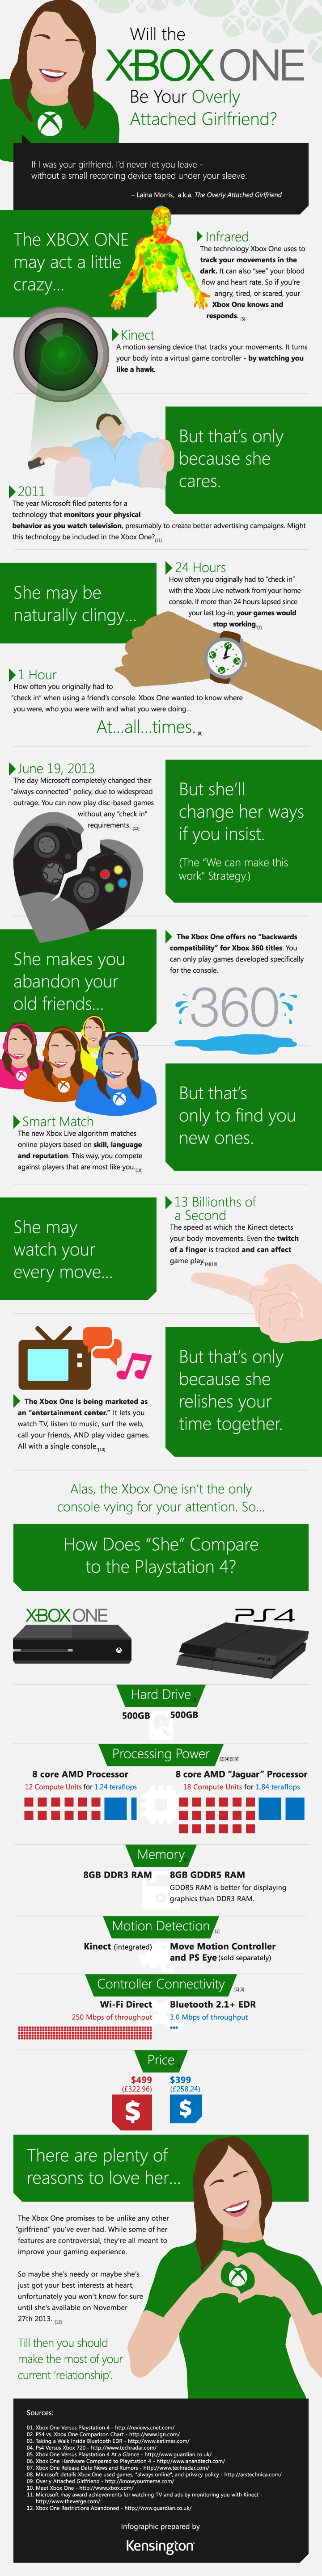 Will the Xbox One Be Your Overly Attached Girlfriend? 